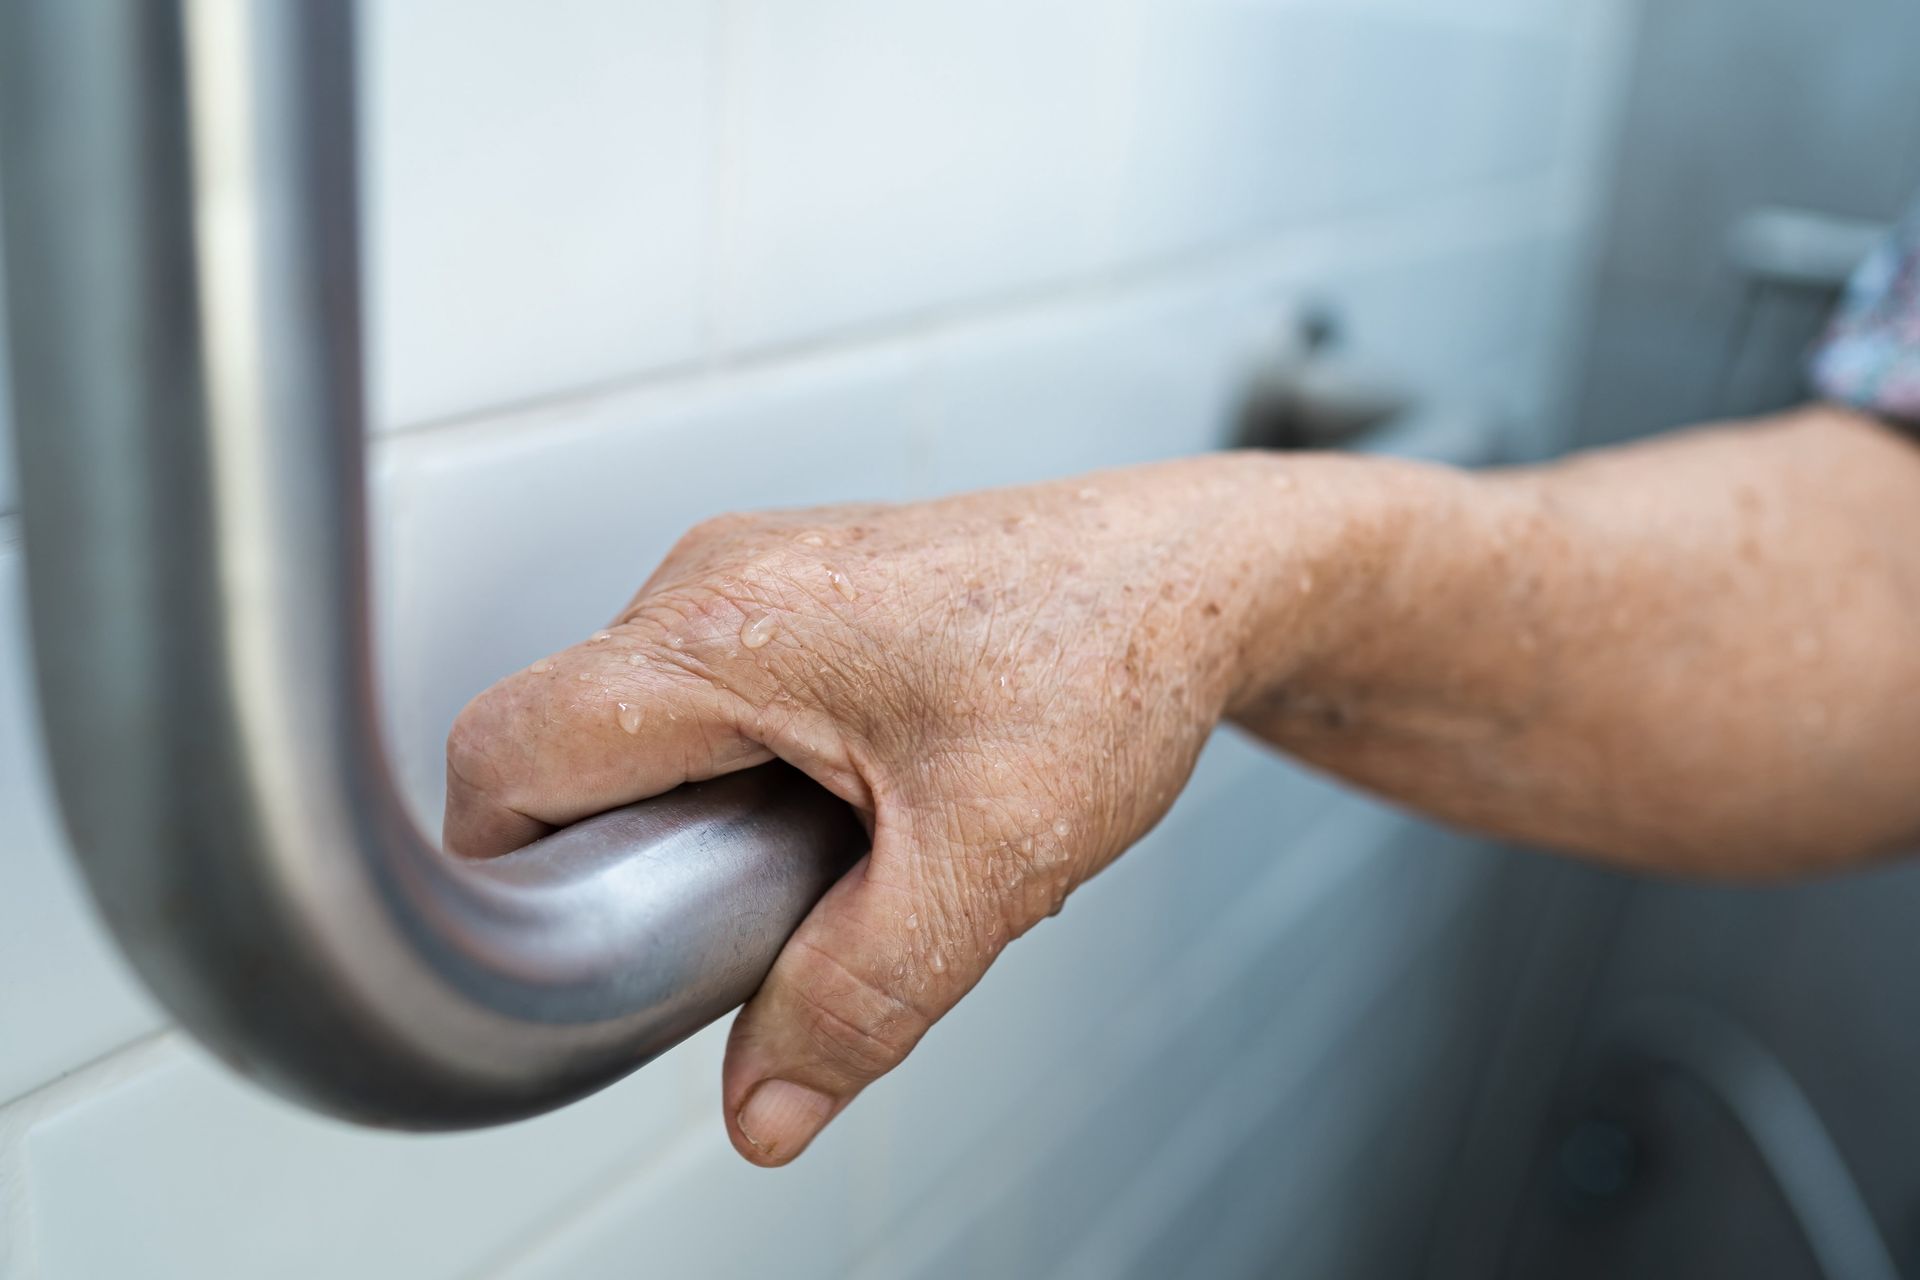 An elderly woman is holding onto a metal railing in a bathroom.